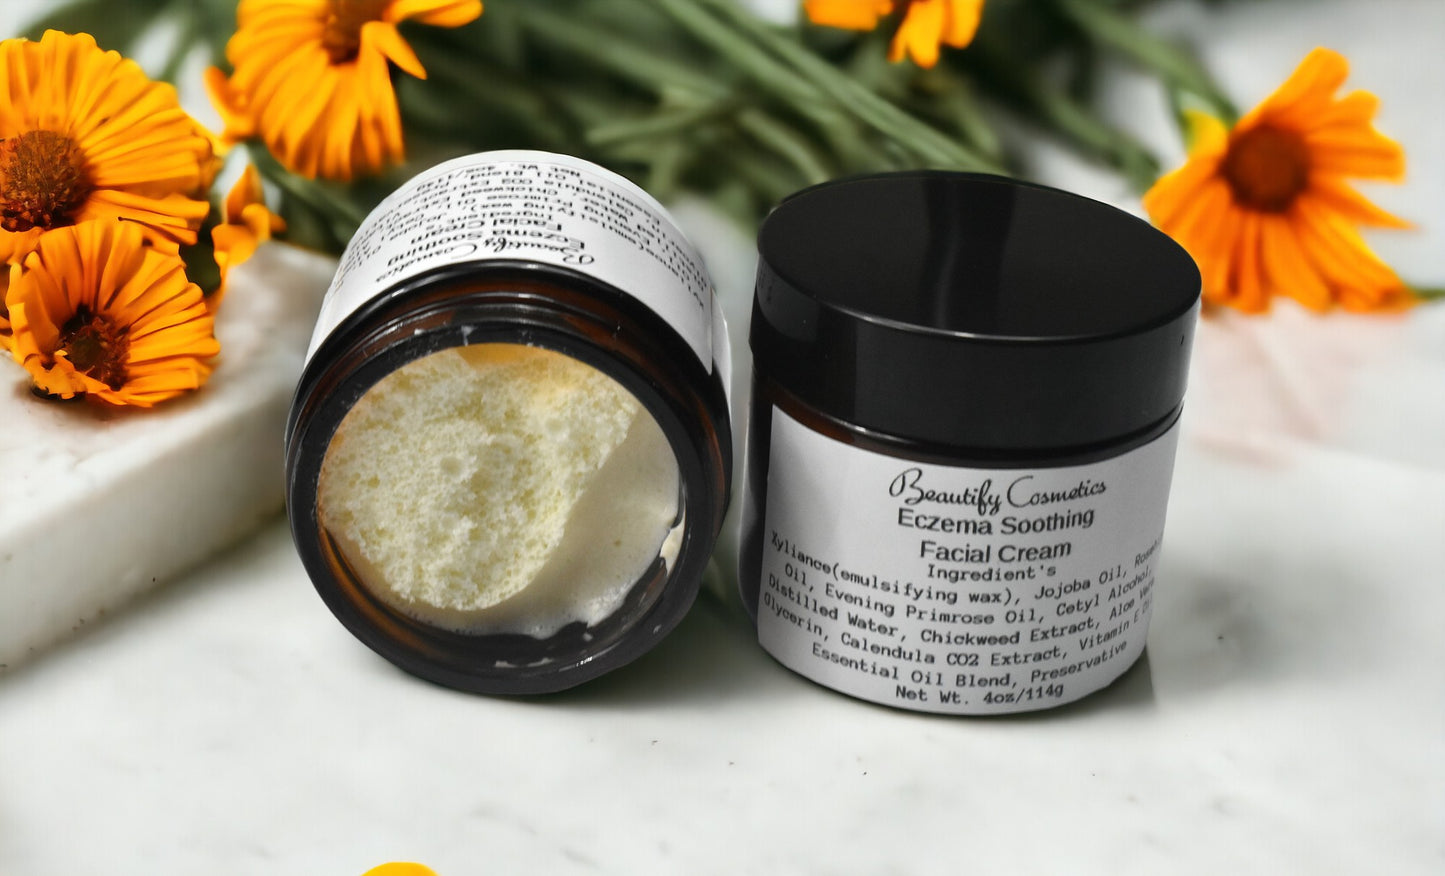 Eczema Soothing Face Cream